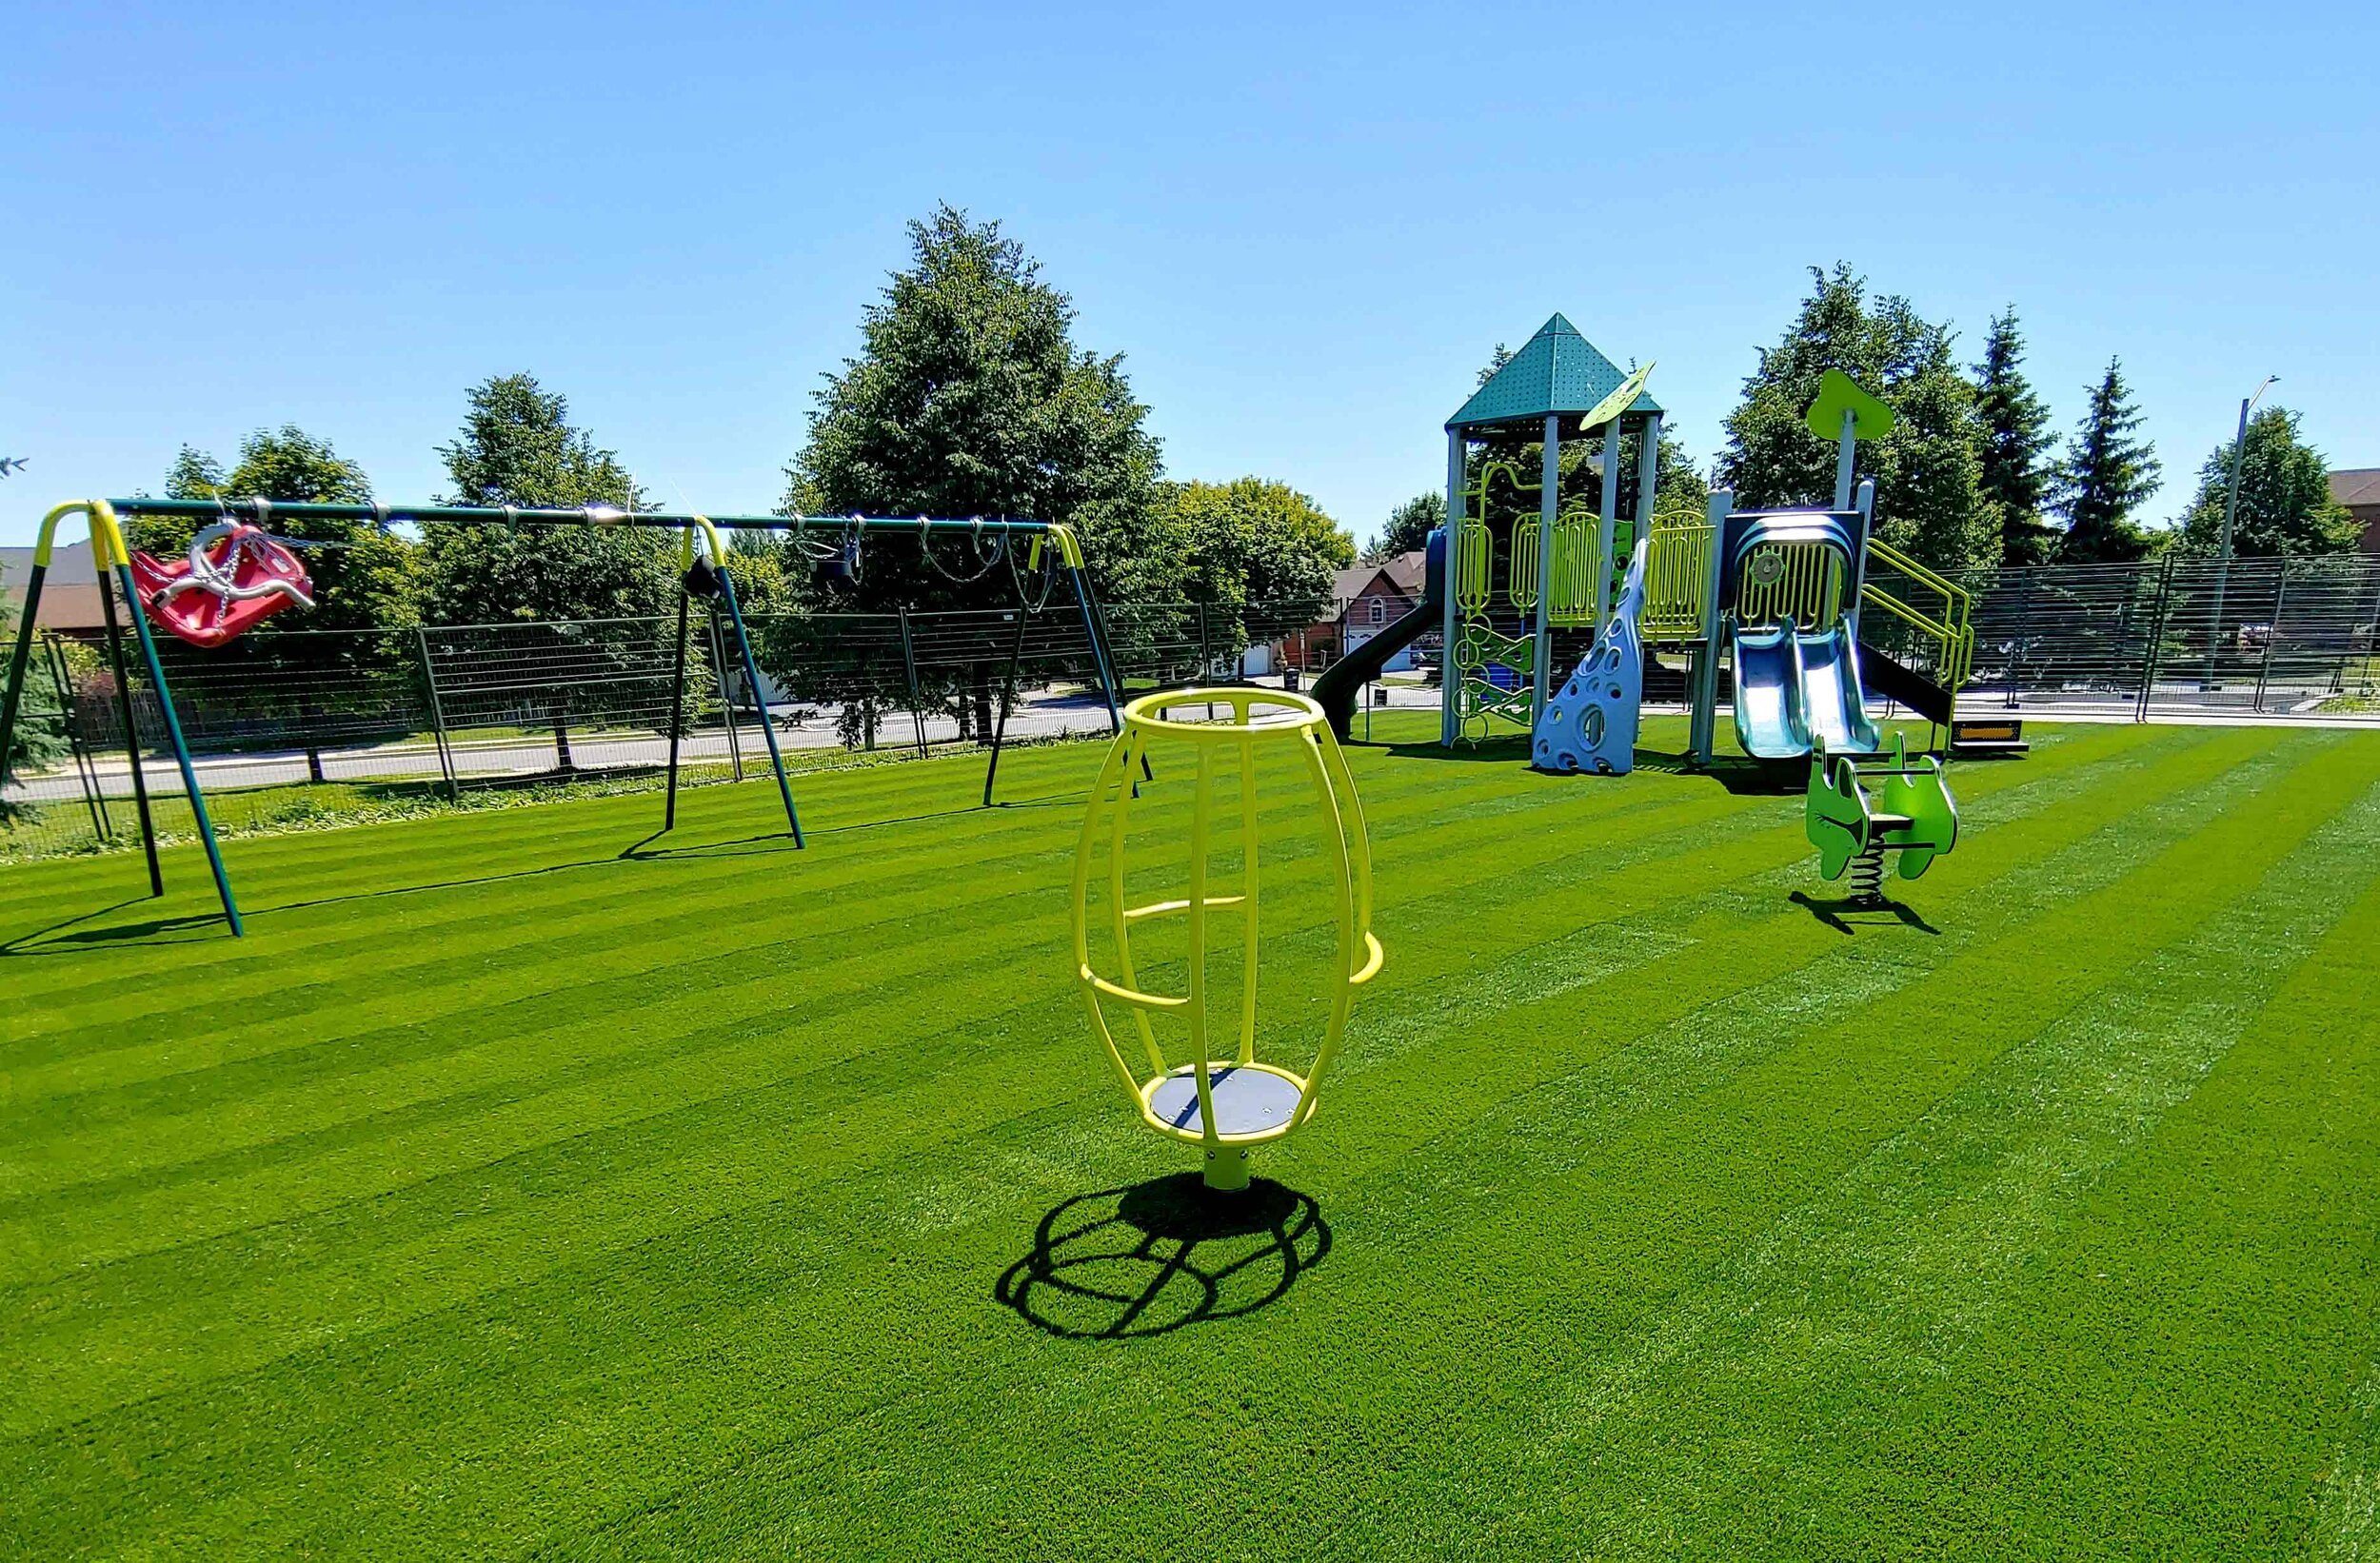 TurfKings-Synthetic-Grass-Turf-GTA-Landscaping-Playground-20200617_121619_HDR.jpg